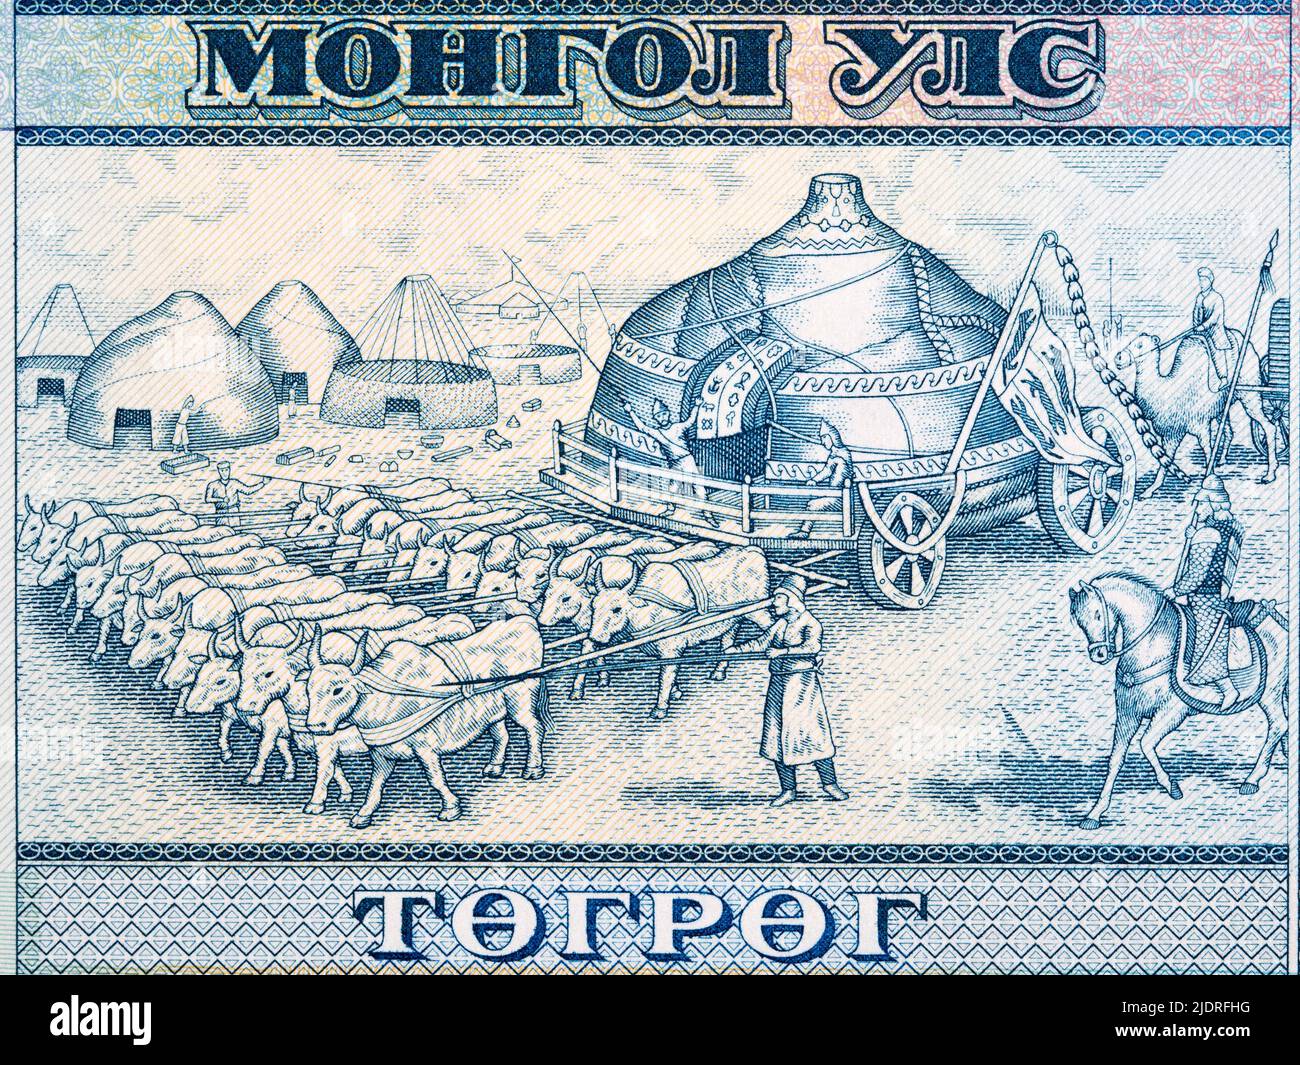 Mongolian yurts in motion from money - Tugrik Stock Photo